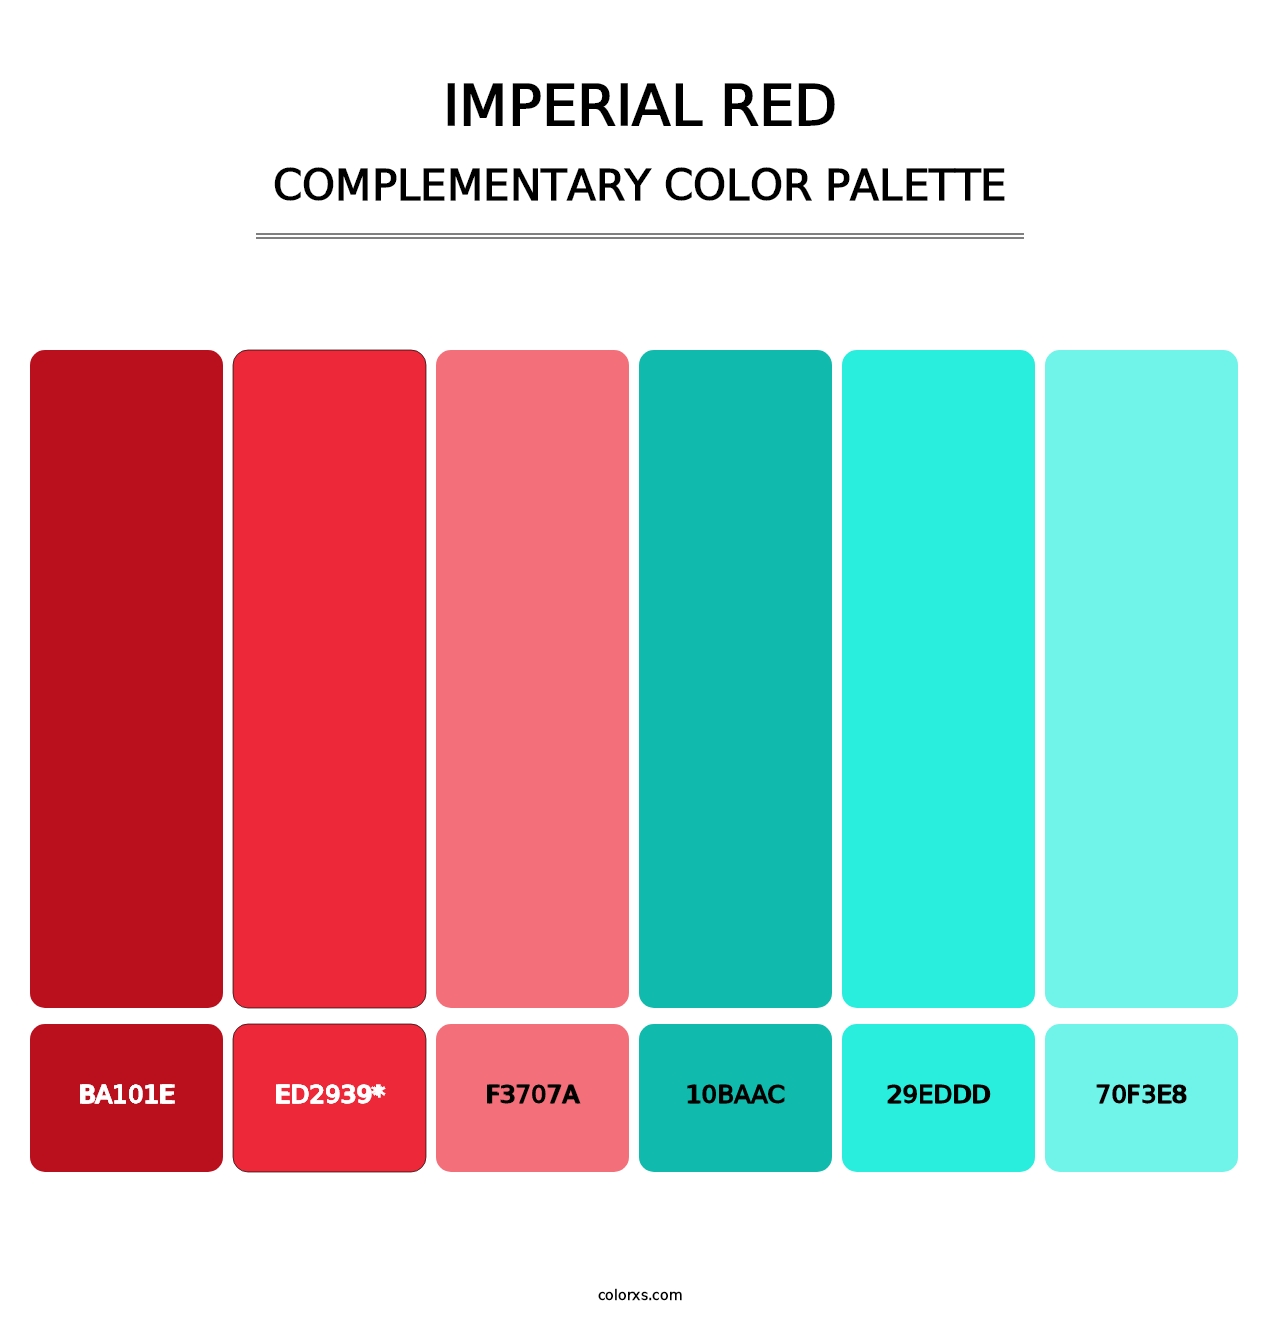 Imperial Red - Complementary Color Palette